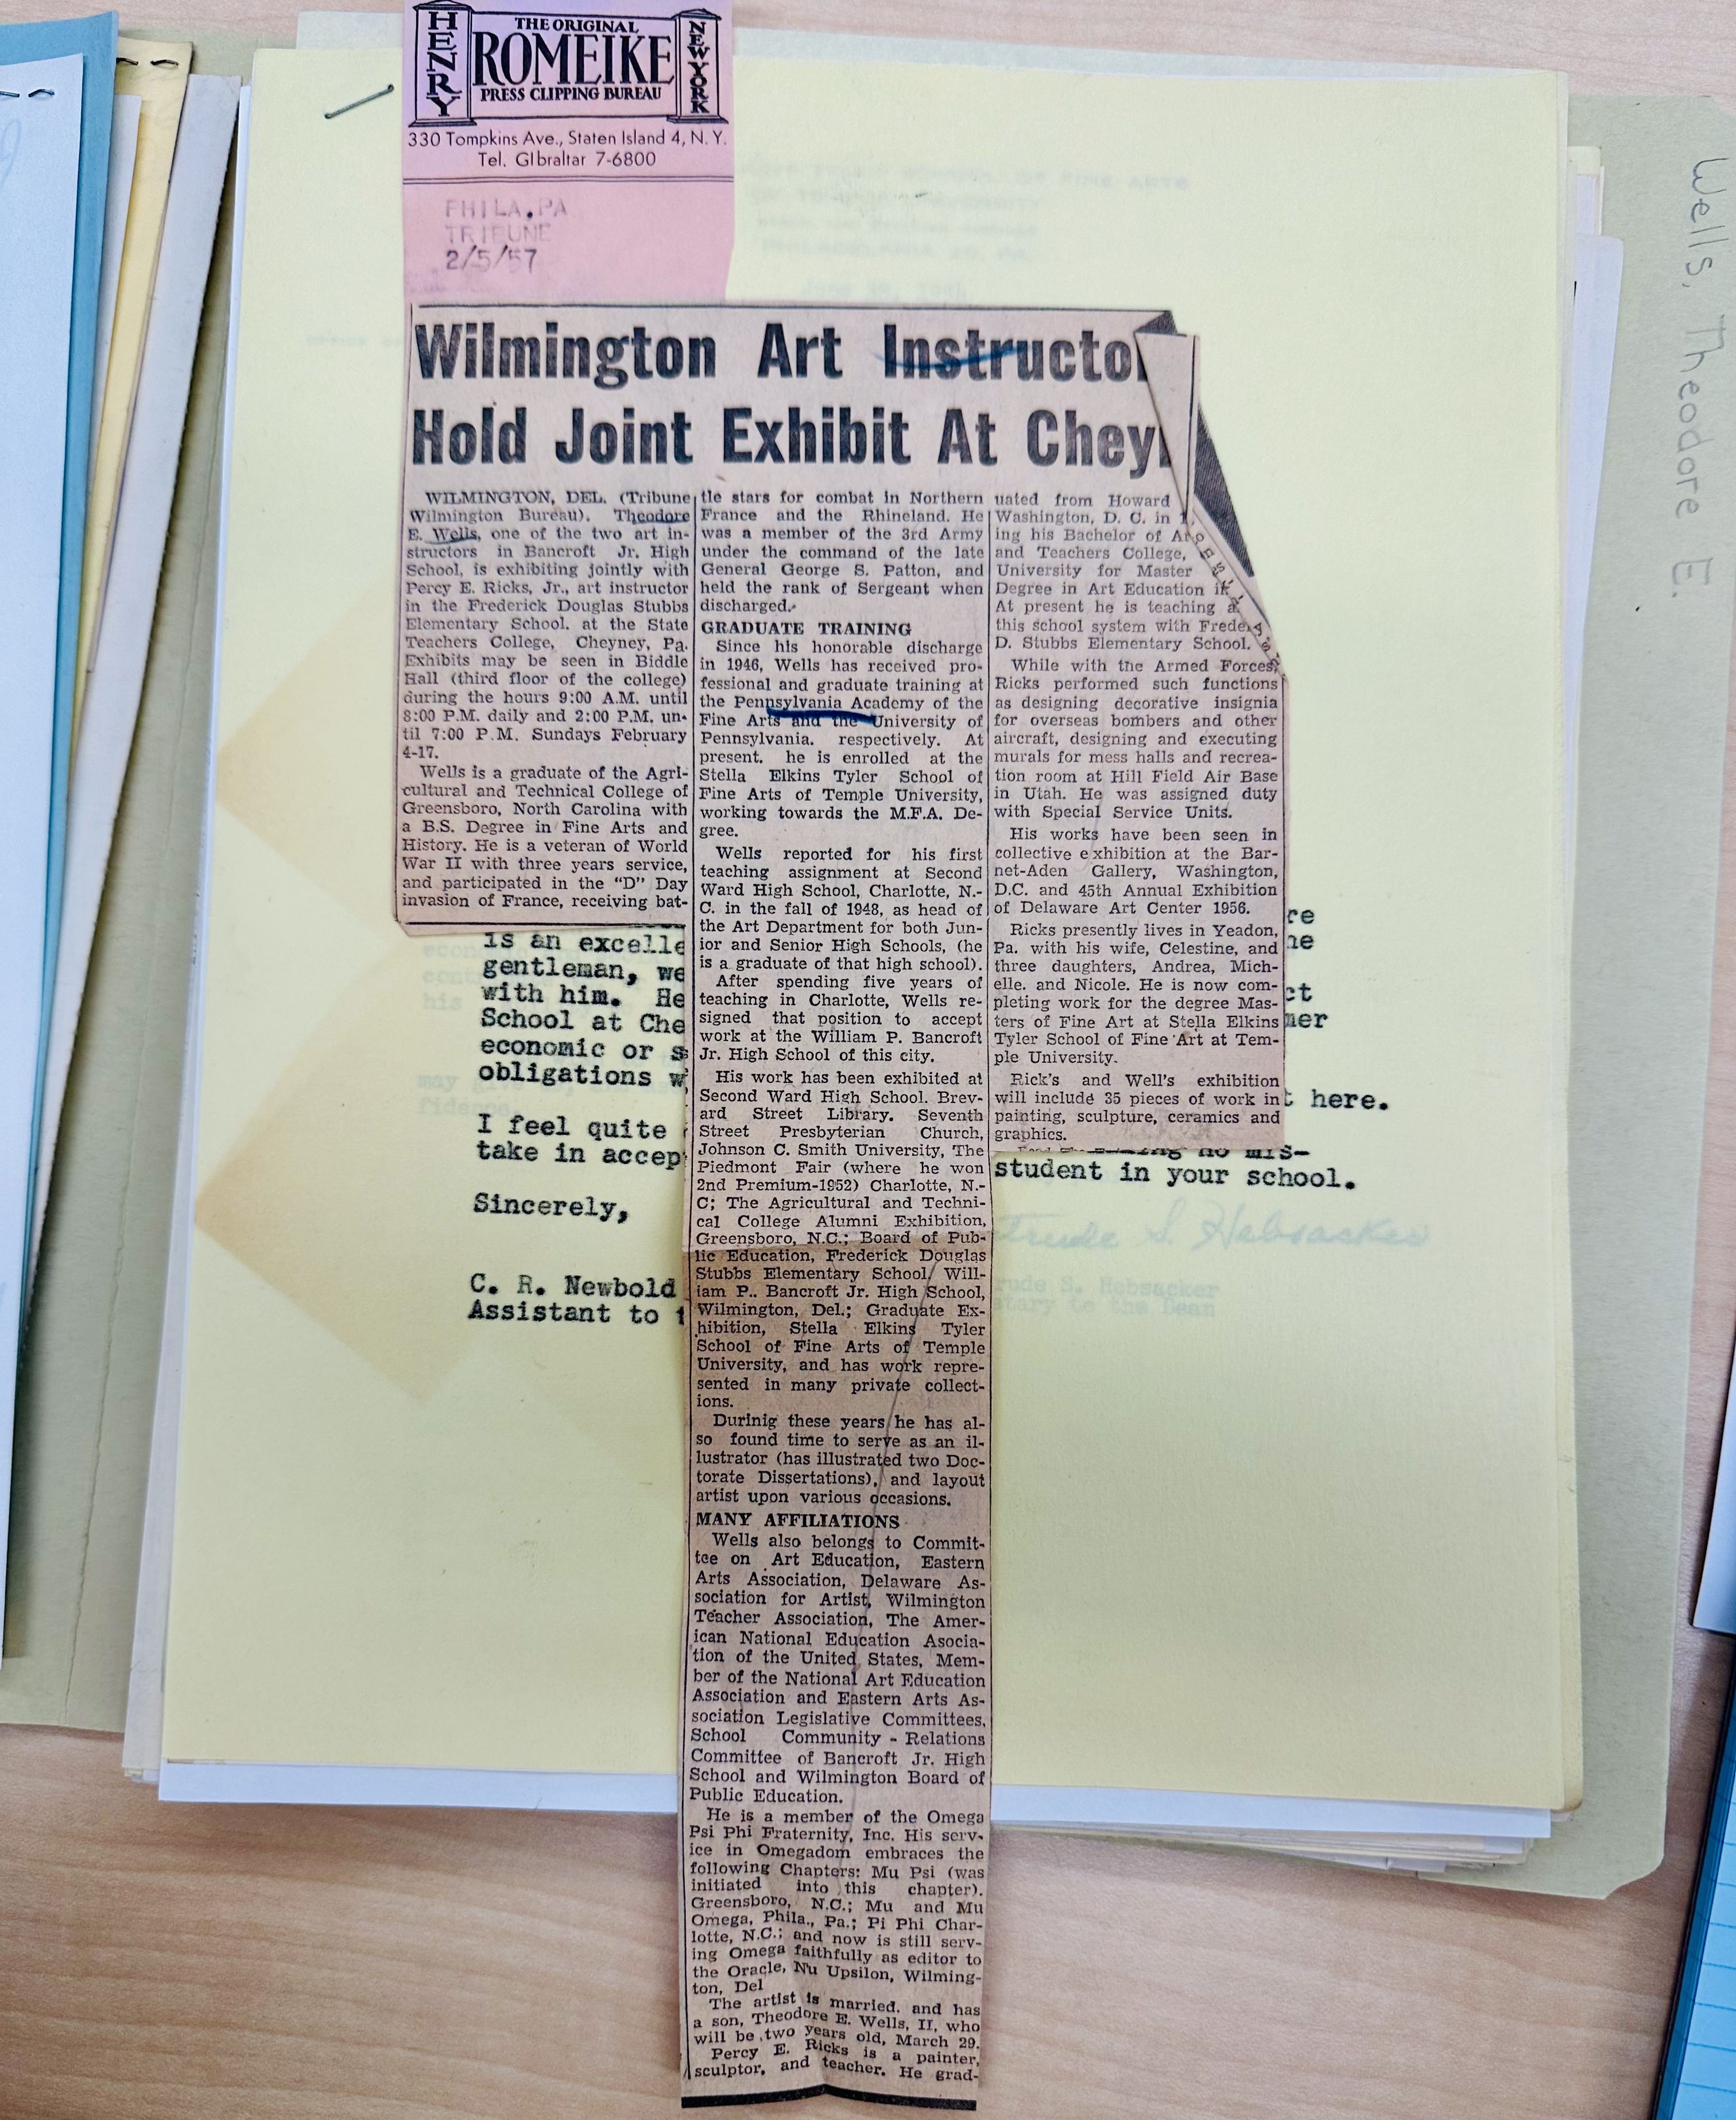 Newspaper article clipping atop a stack of archival files.